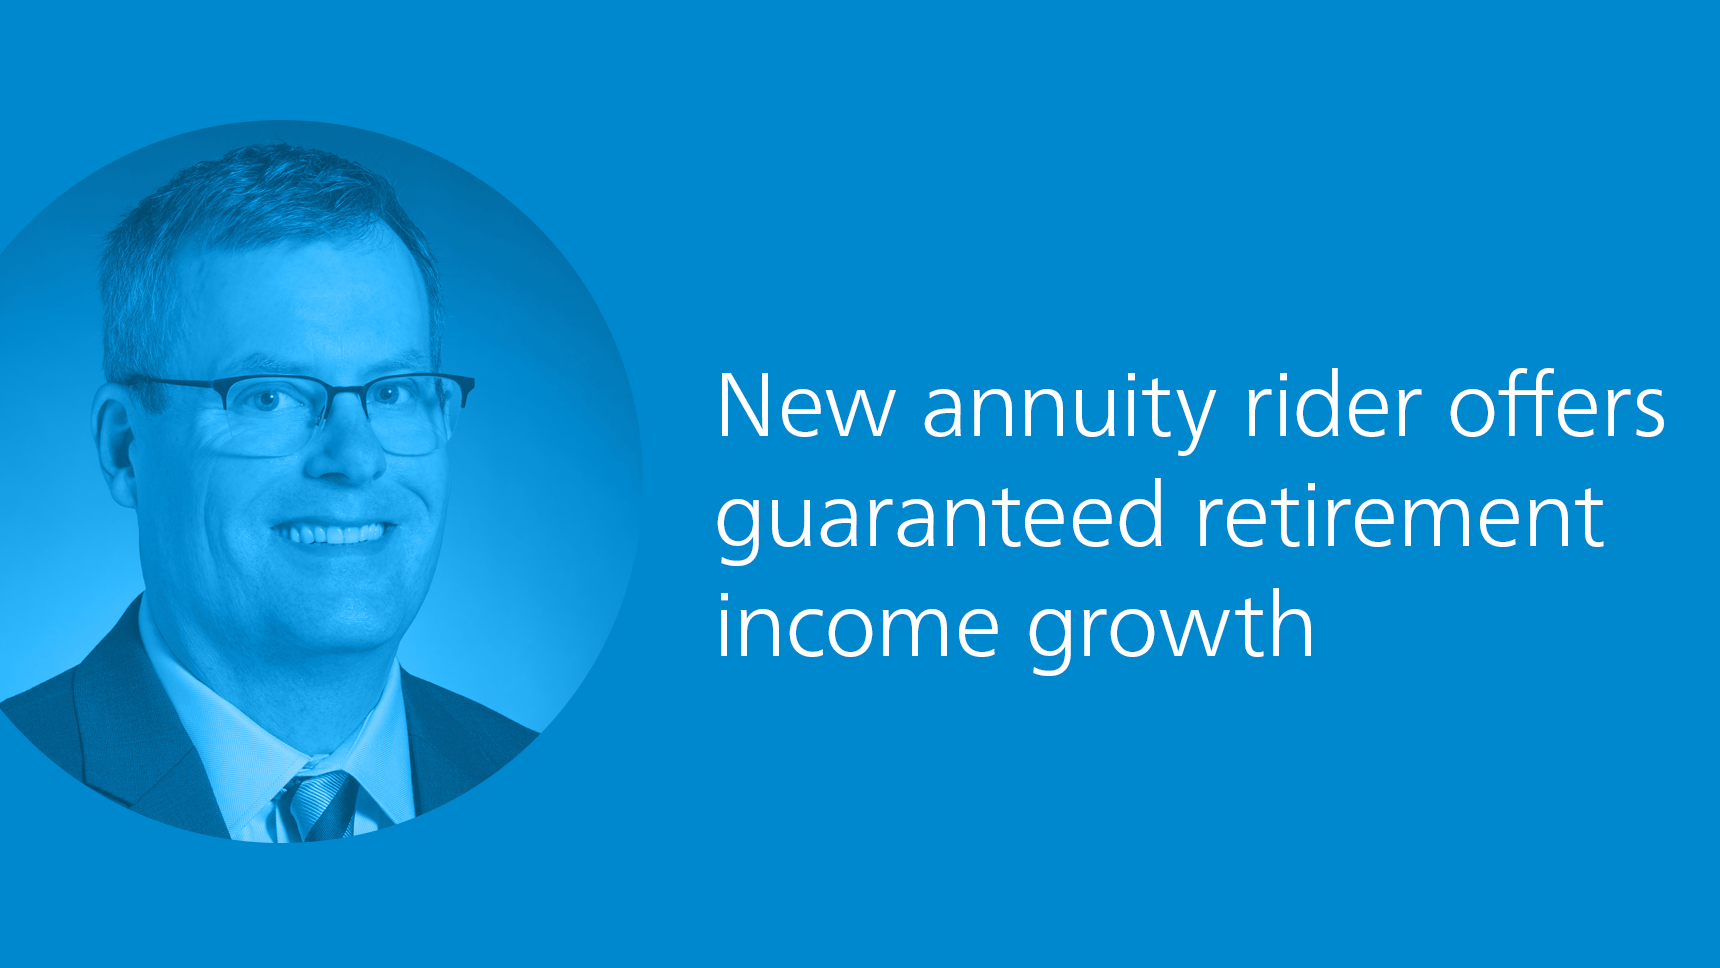 New annuity rider offers guaranteed retirement income growth